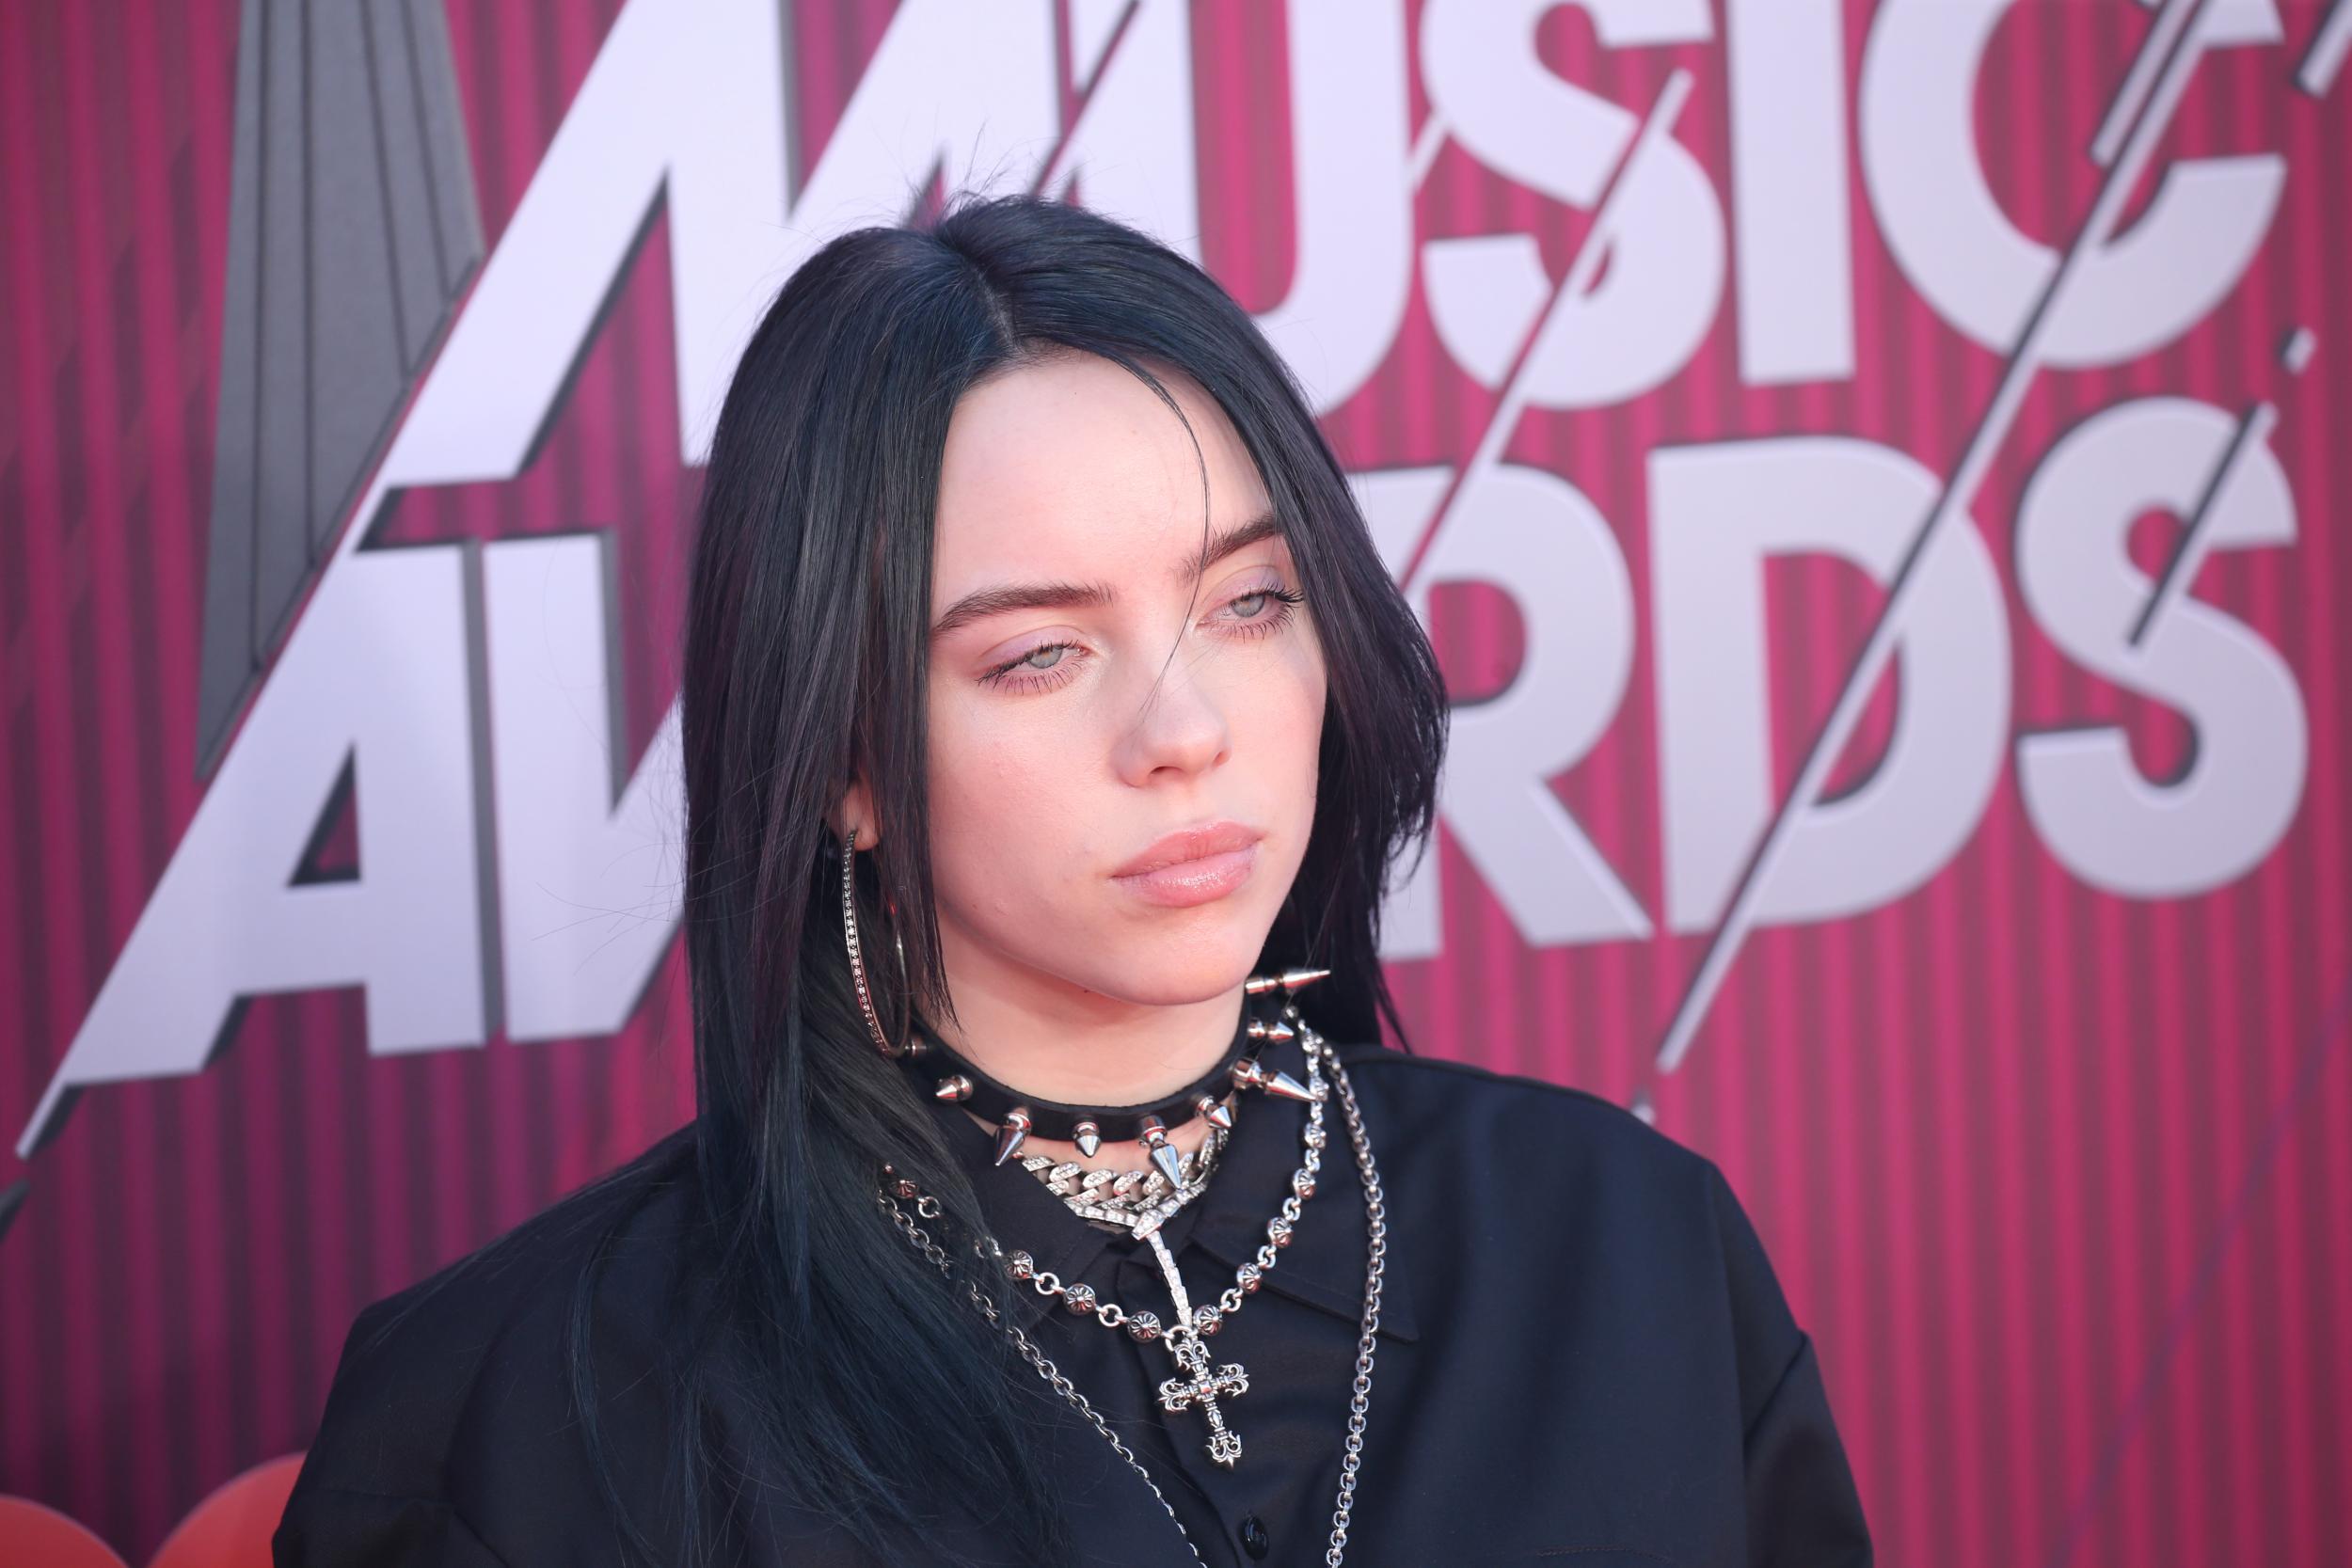 Billie Eilish interview: 'I want to be able to mourn